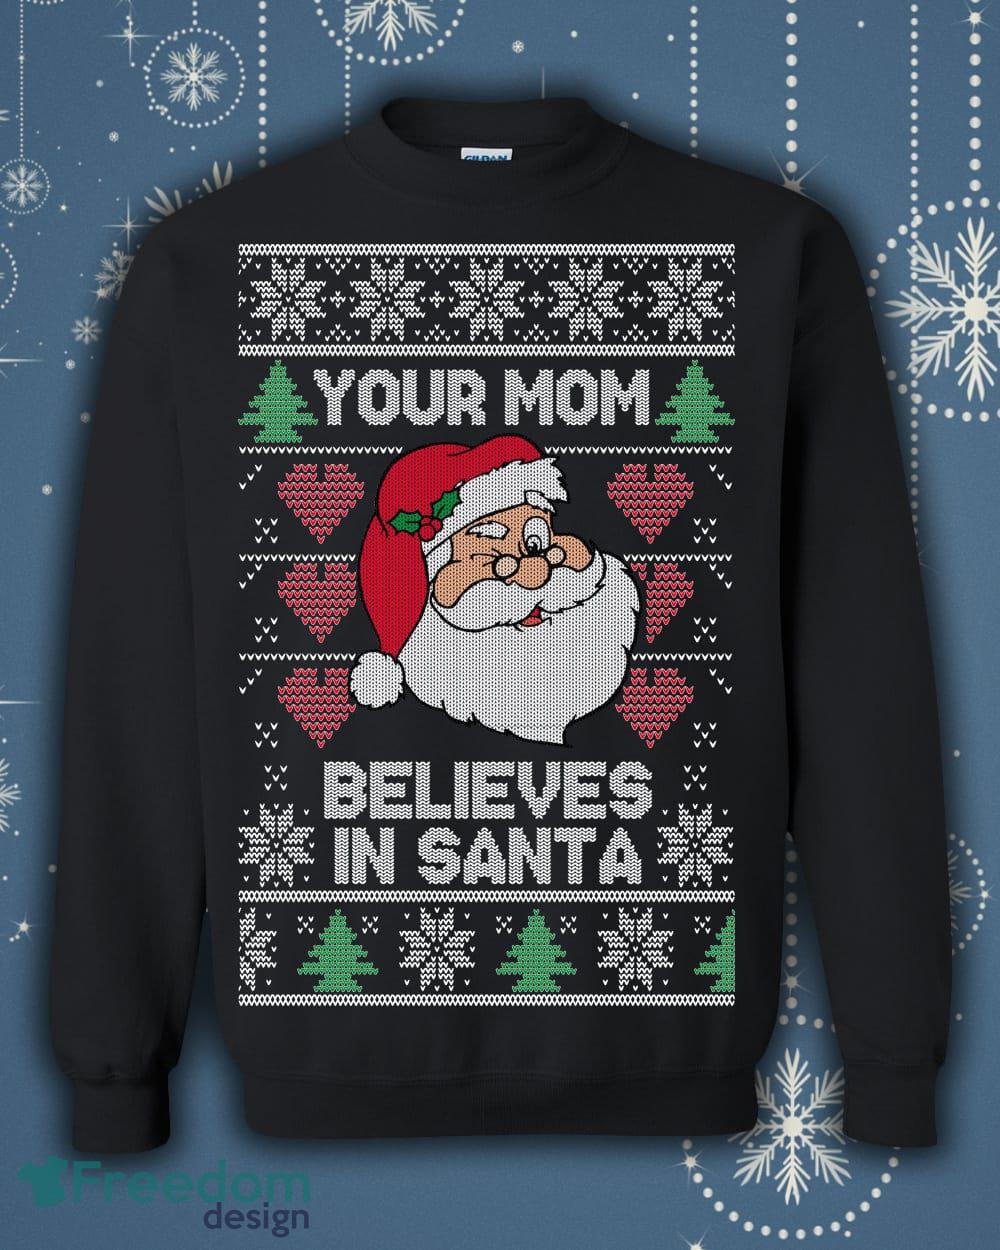 Ugly Christmas Sweater Your Mom Believes in Santa Claus Unisex Sweatshirt - Ugly Christmas Sweater Your Mom Believes in Santa Claus Unisex Sweatshirt_1